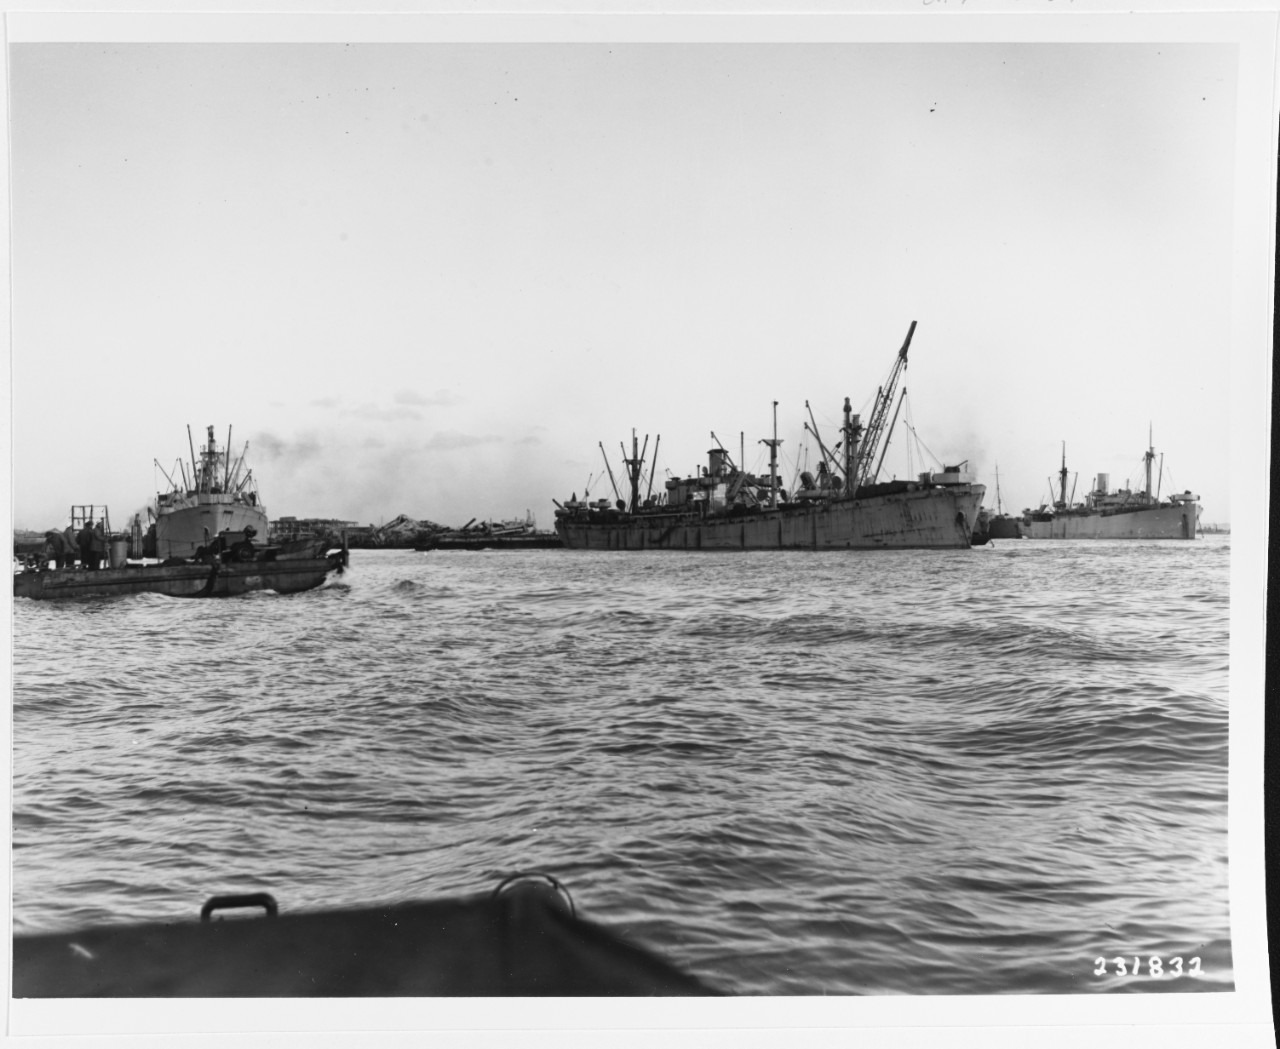 "Liberty" Ships and other Freighters in Le Havre Harbor, November 18, 1944